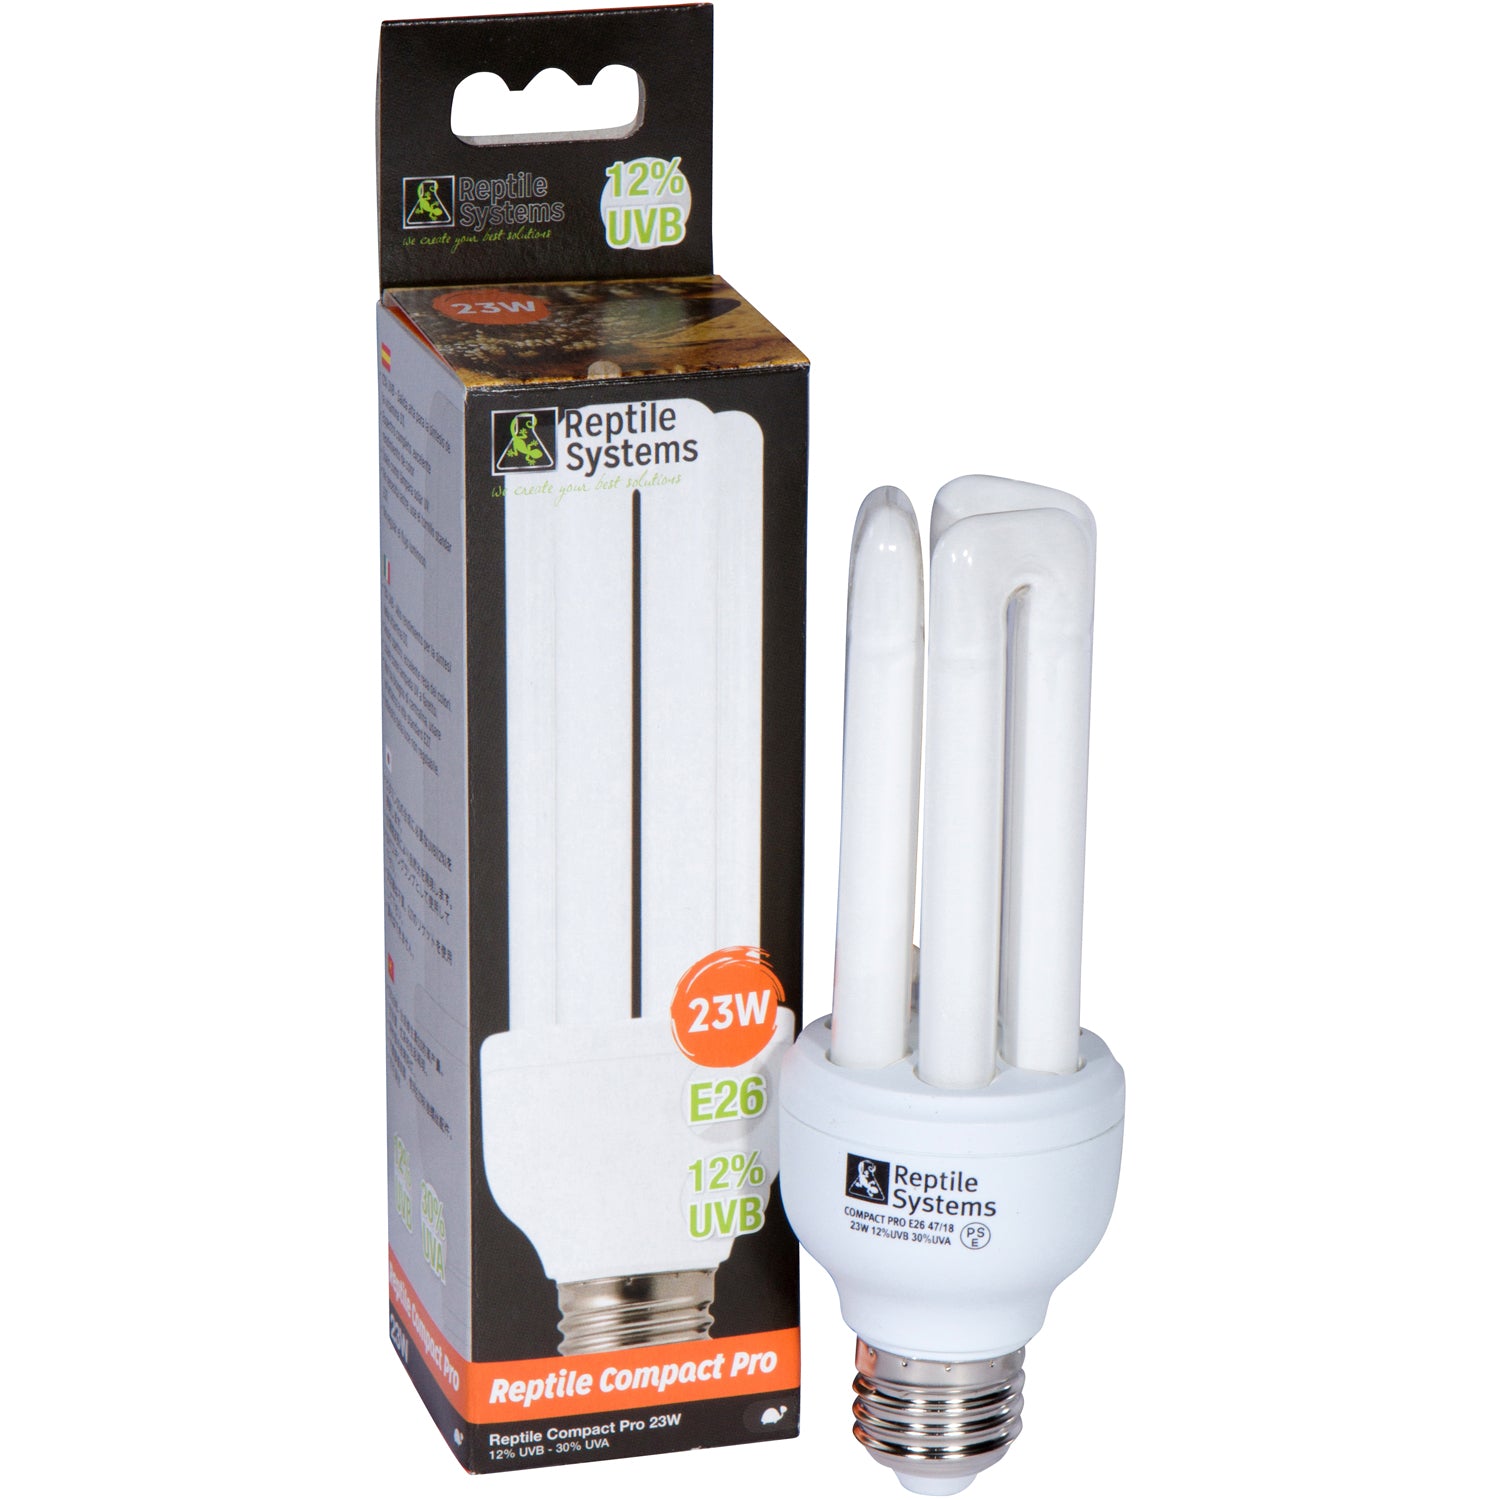 Reptile Systems Compact Pro 12% UVB - Zone 3 bulb and package